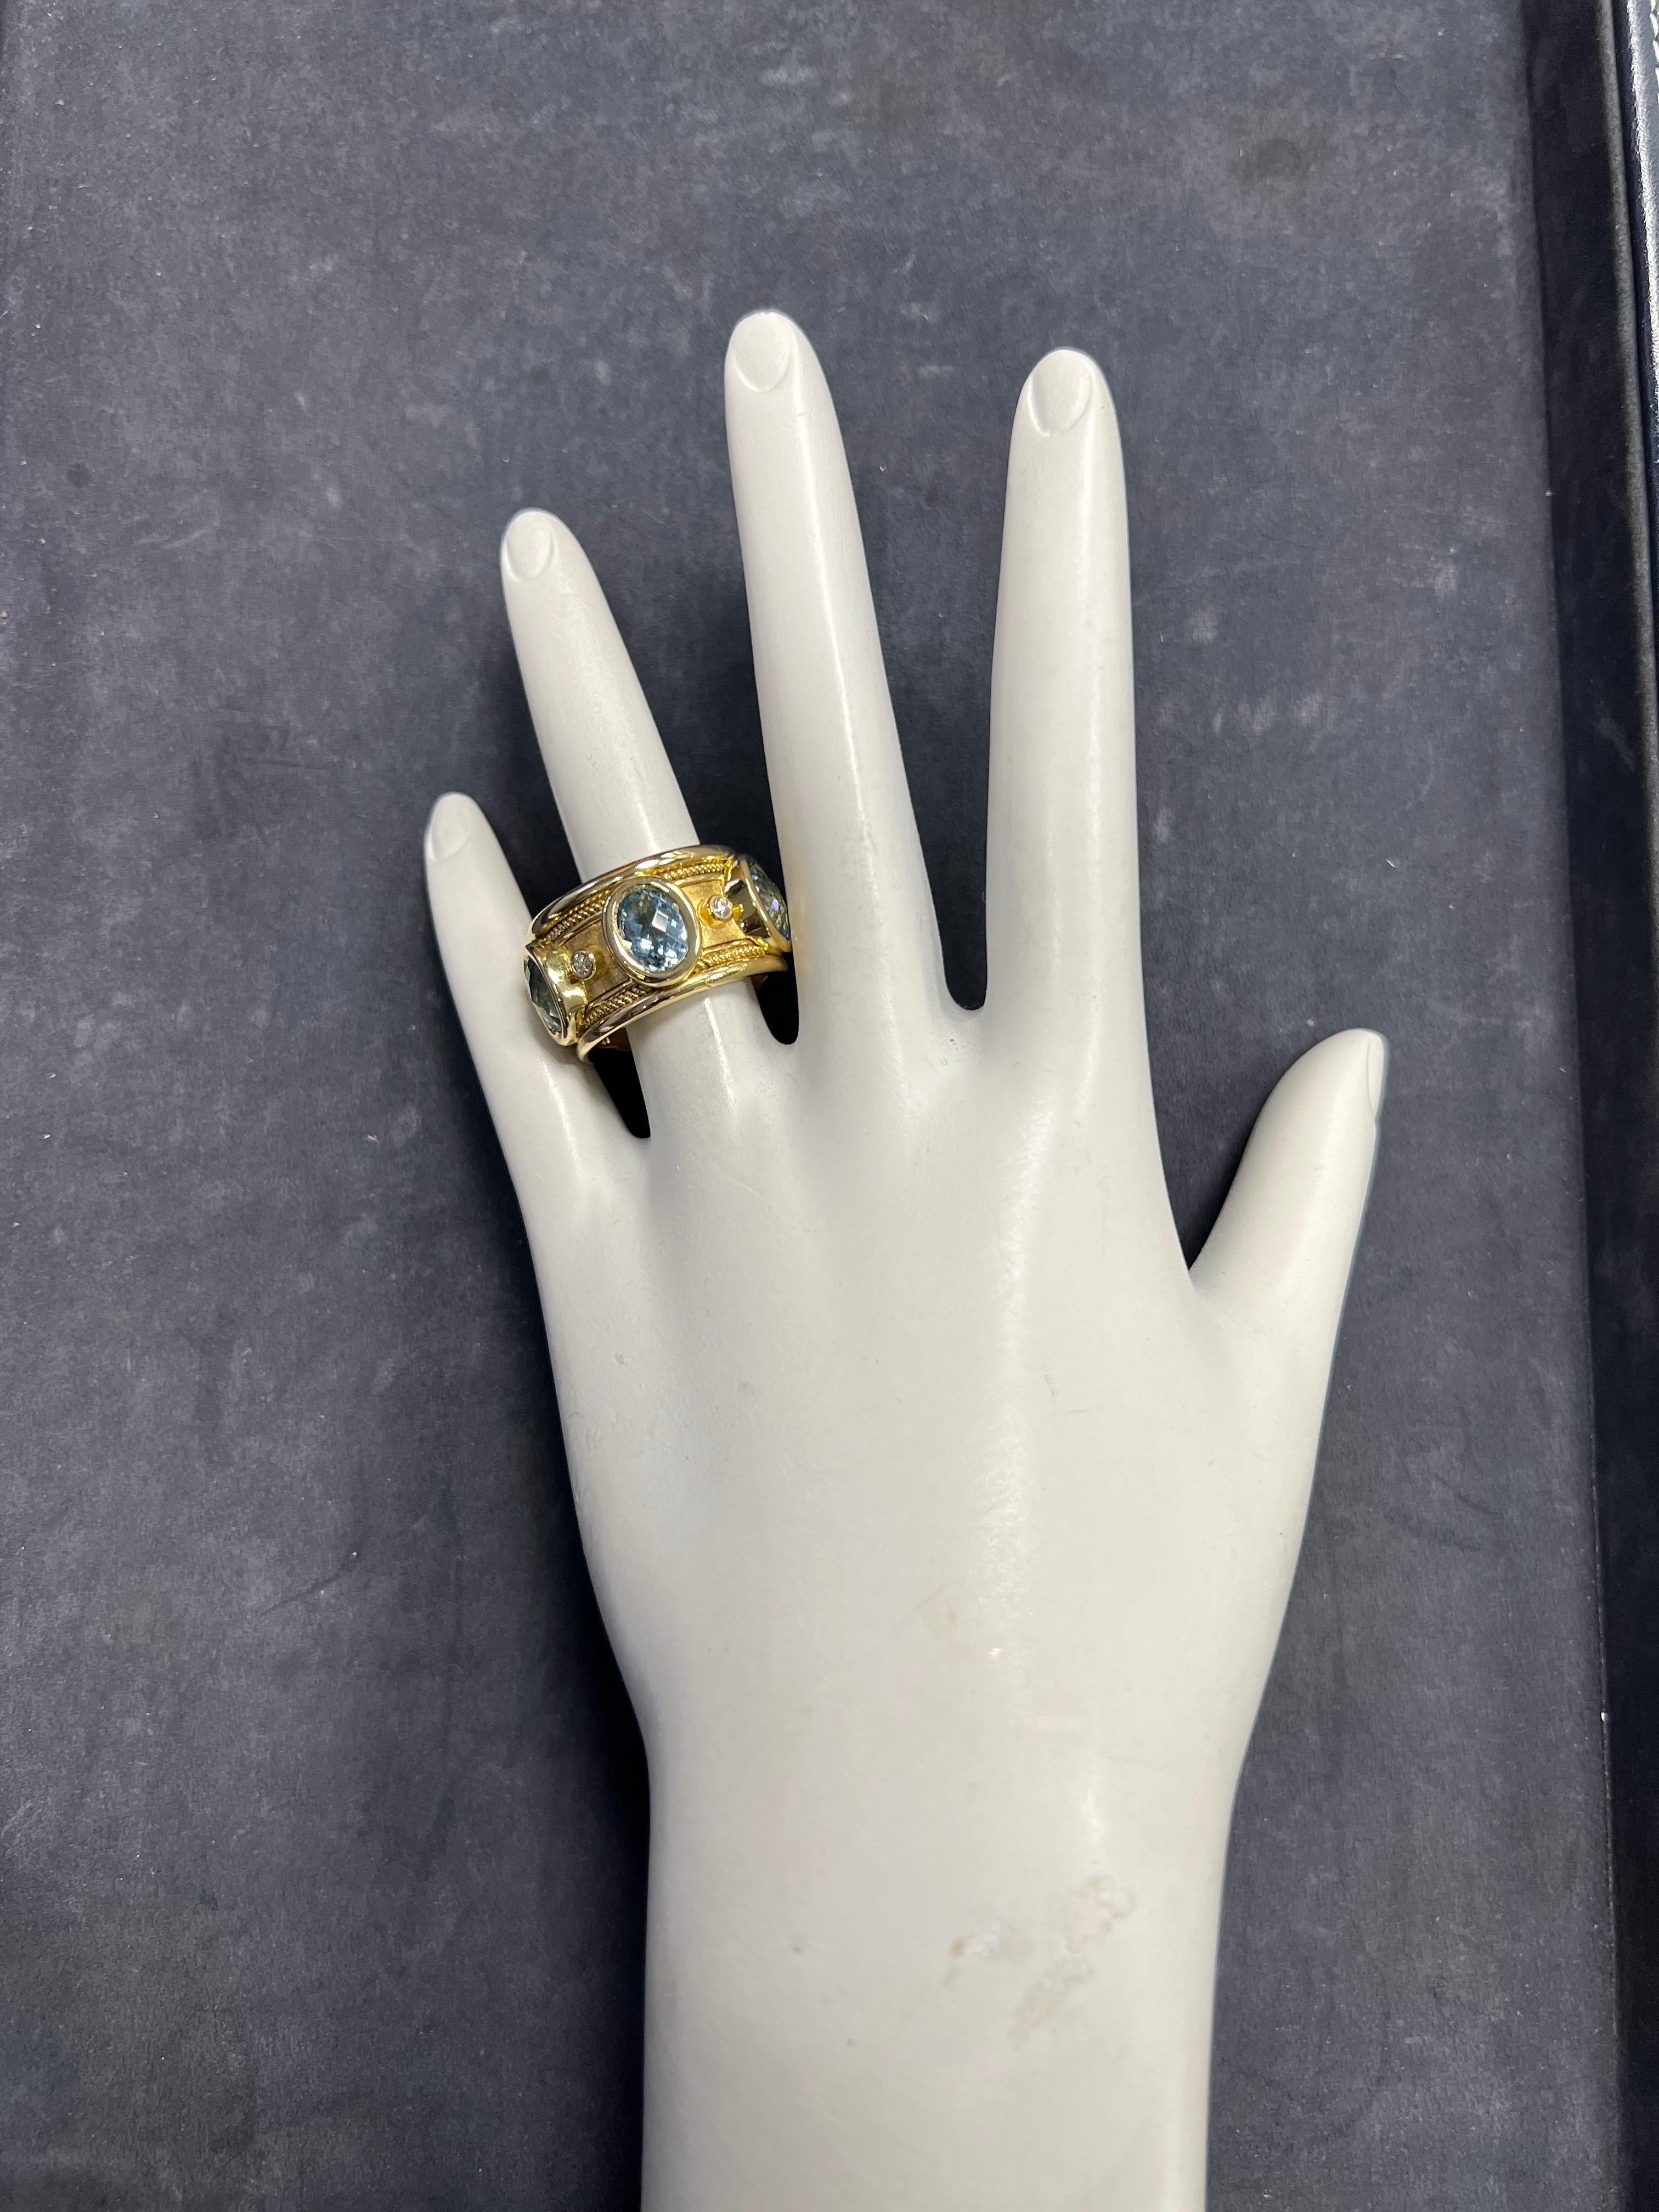 A magnificent 18k yellow gold cocktail ring signed by Christoff with a unique twisted rope design. The finish is satin in the middle and high polish elsewhere. 

Set with five swiss blue topaz ovals measuring 8x6mm and five natural colorless round